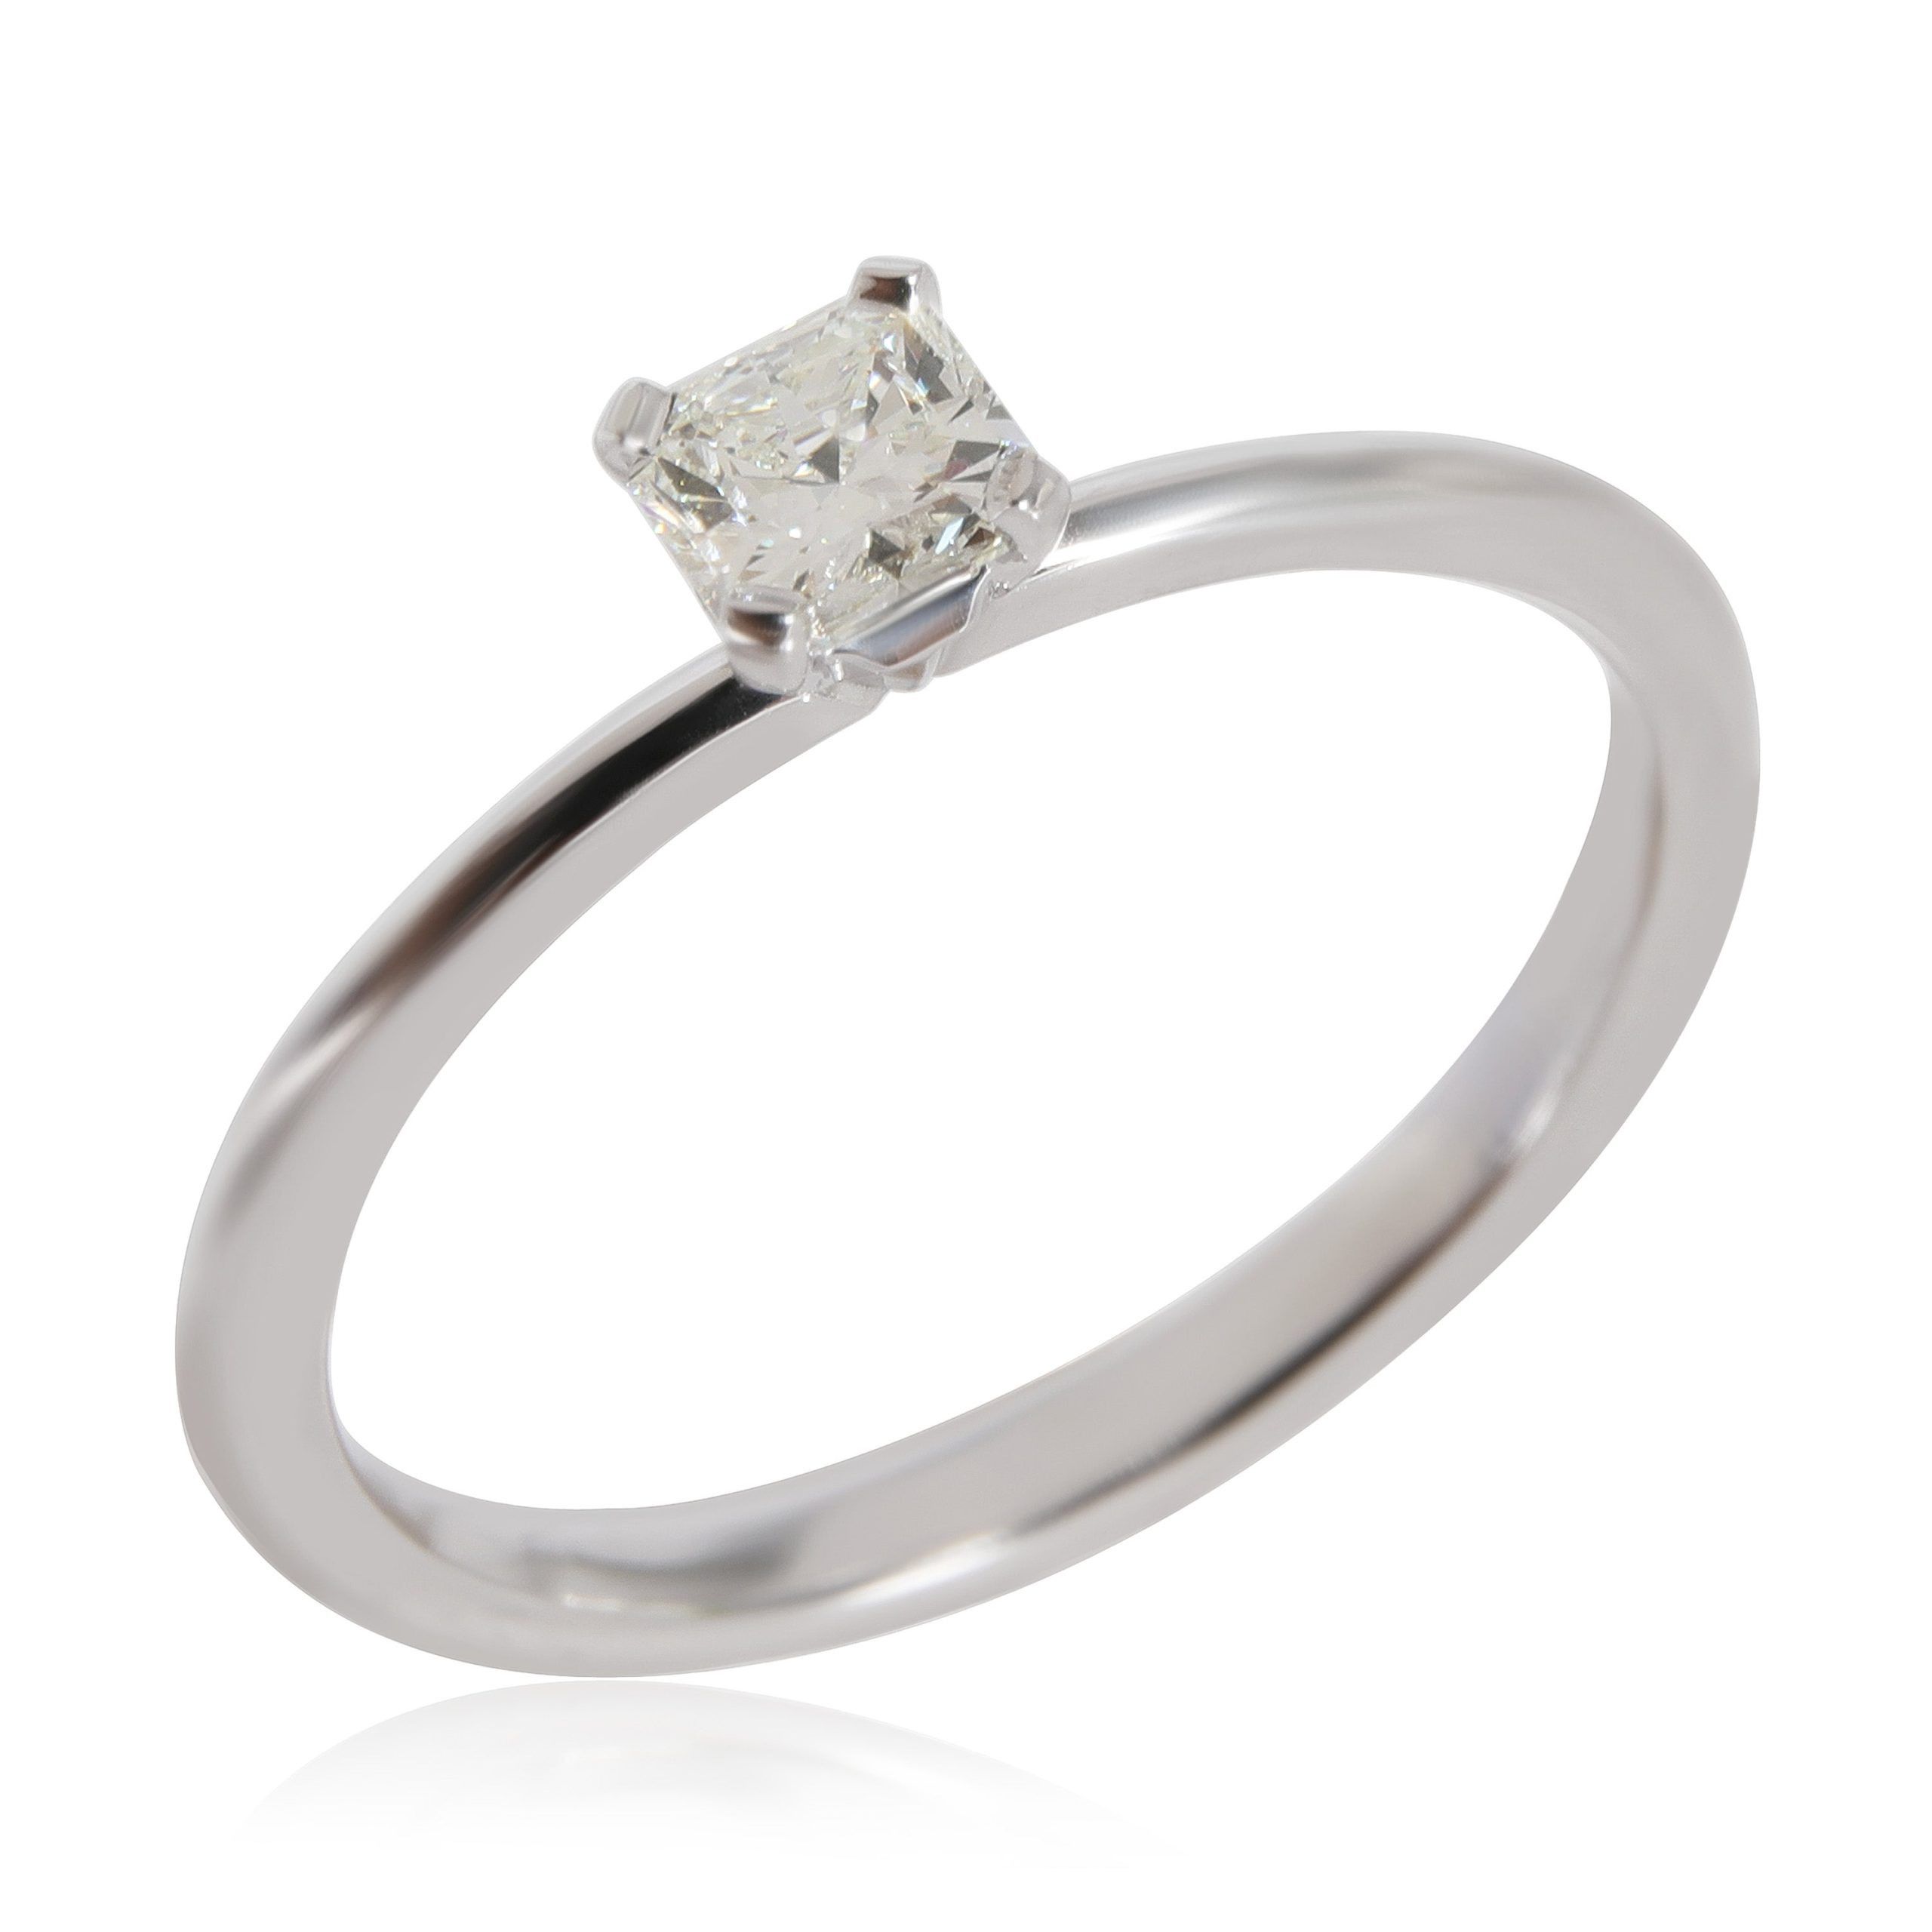 Tiffany & Co. Tiffany & Co. Diamond Solitaire Engagement Ring in Platinum I VS1 0.27 CTW Size ONE SIZE - 6 Preview